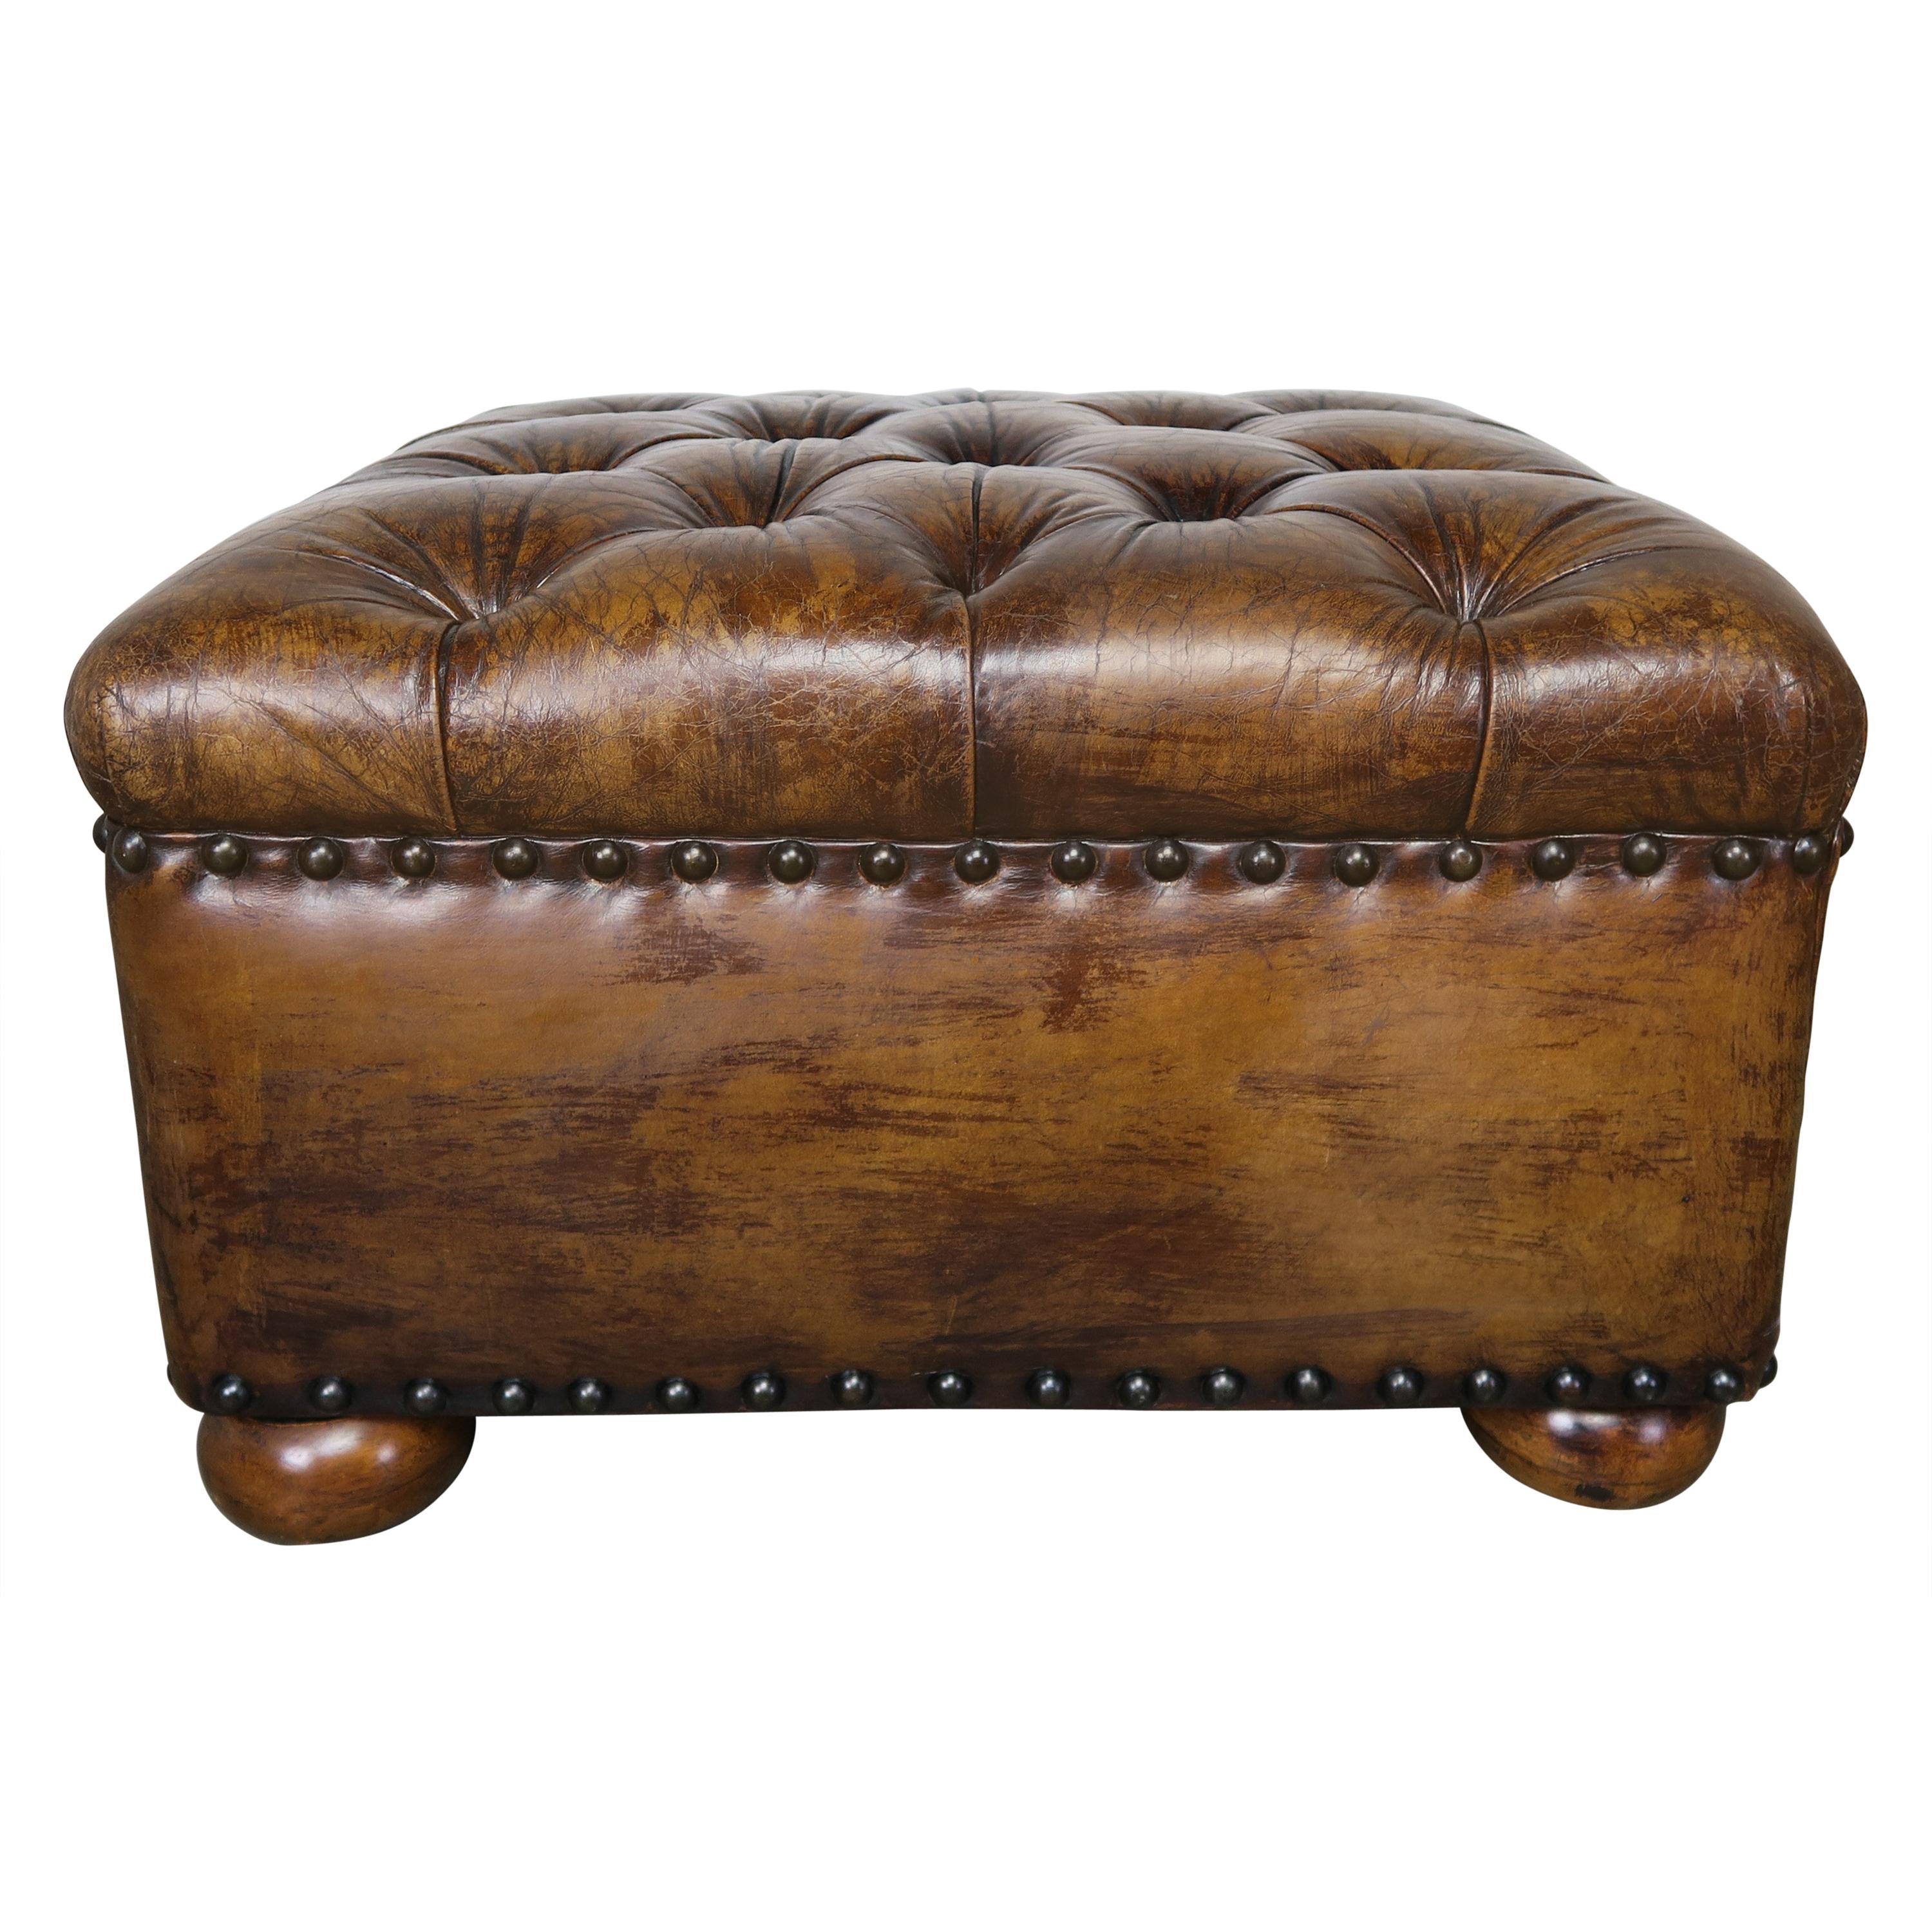 English Style Leather Tufted Bench on Bun Feet